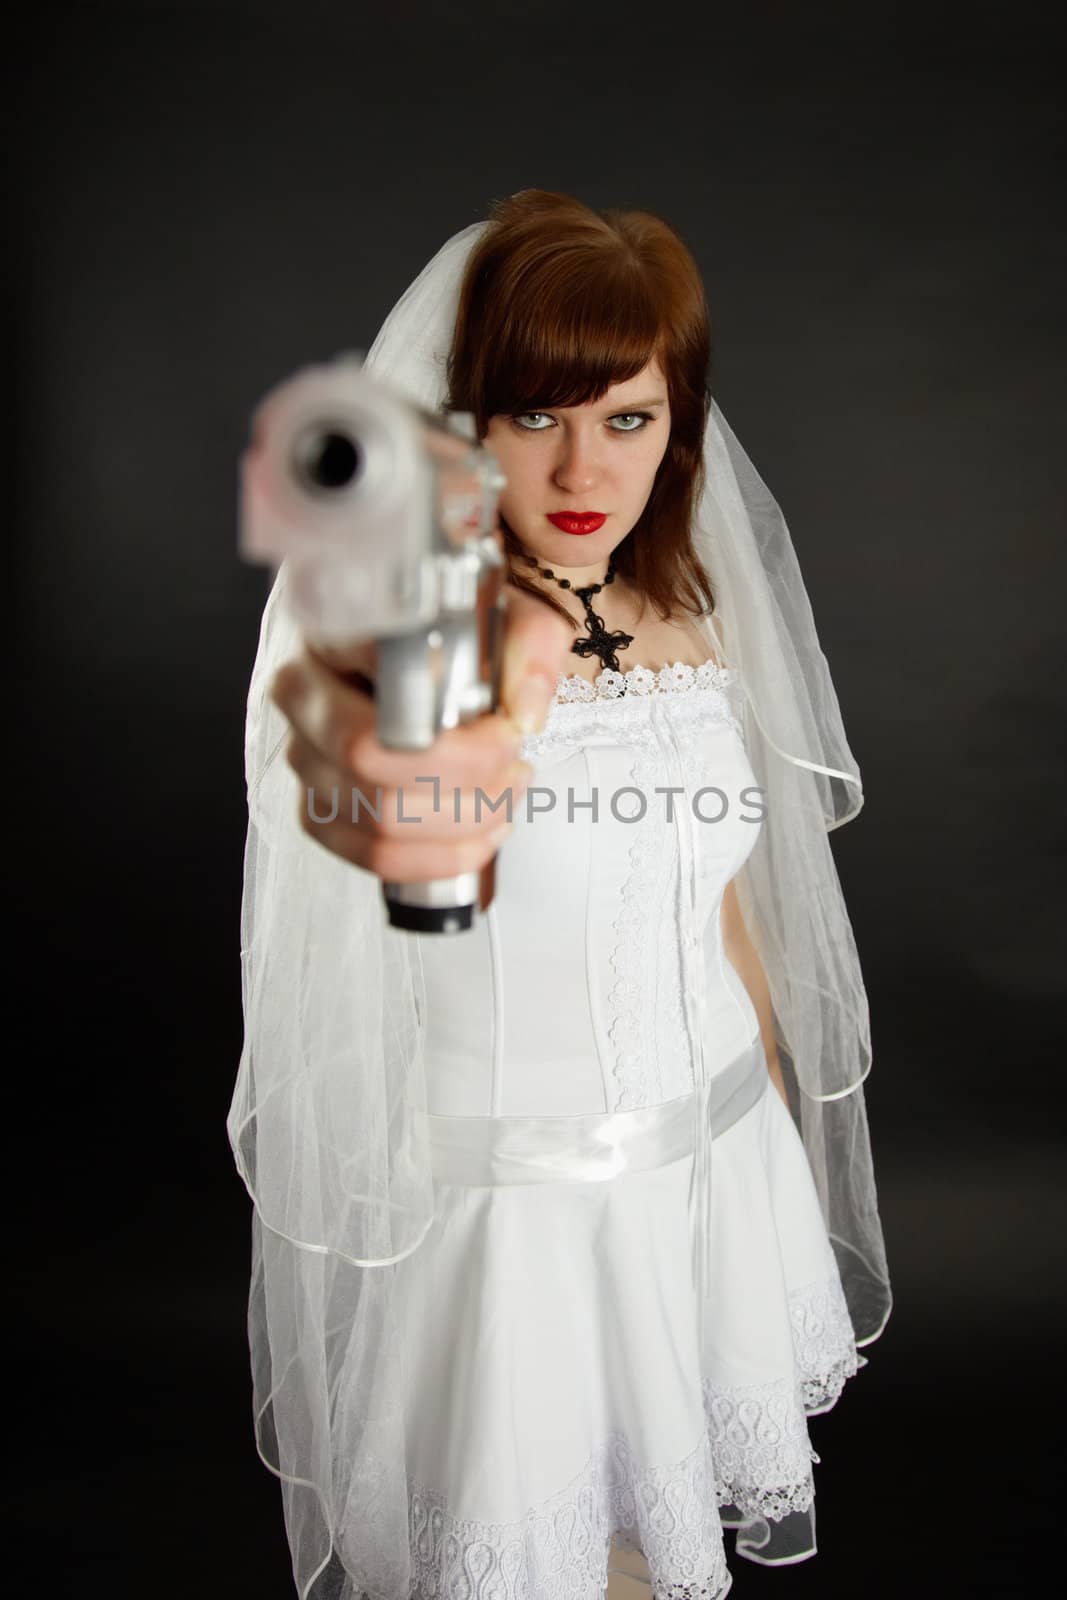 Young bride threatens us with a gun on black background